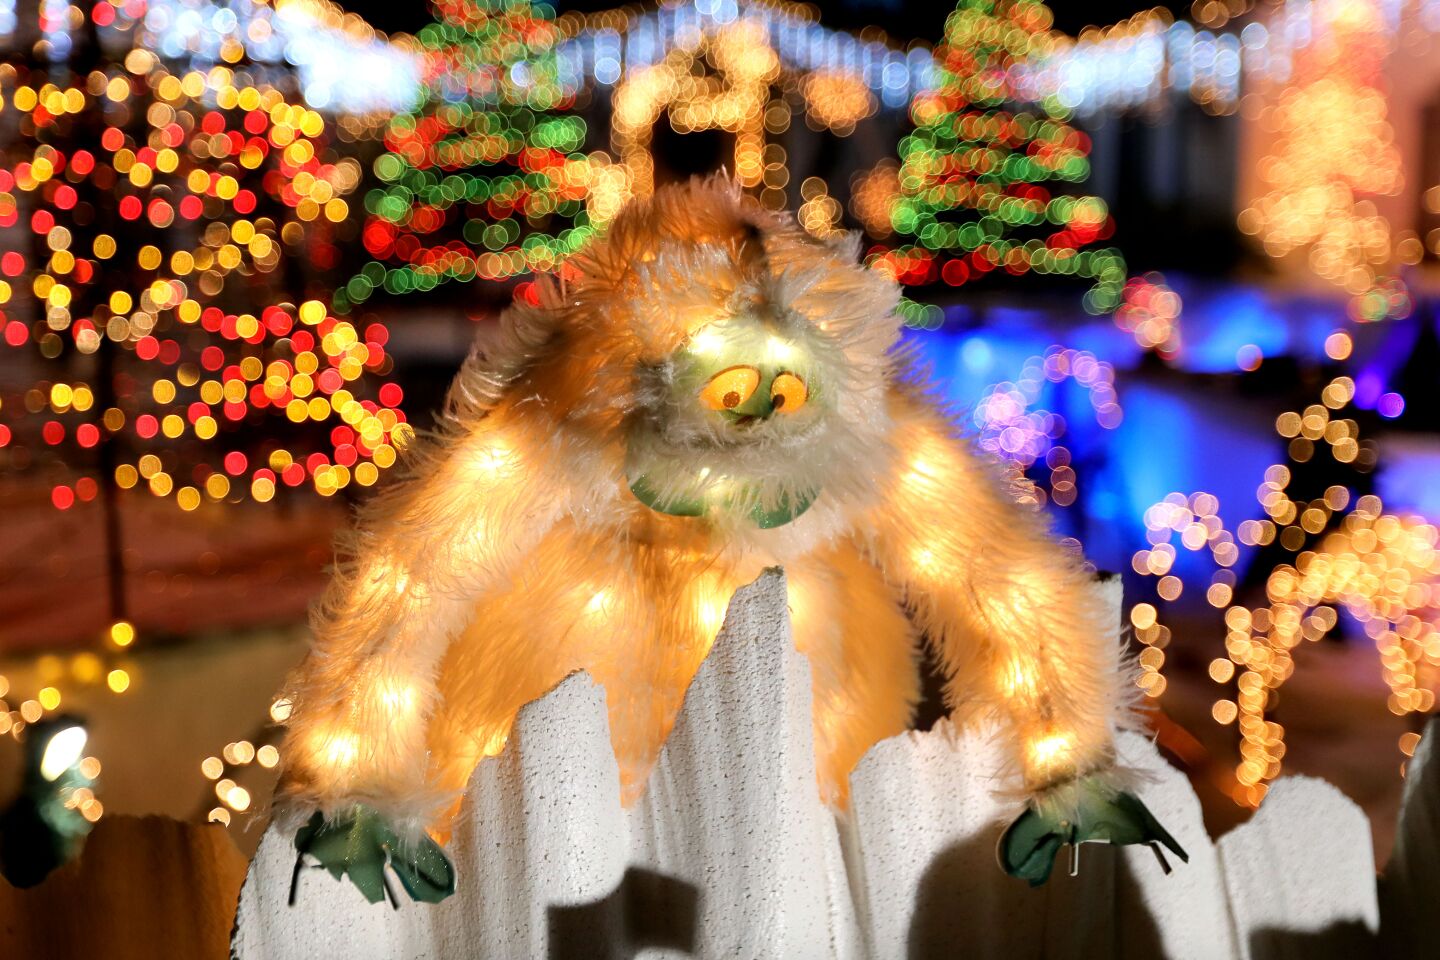 Bumble, the adominable snowmonster of the North, from the television classic "Rudolf the Red-Nosed Reindeer," looks down from his perch at the extensive Christmas light display at the home of Mack Schreiber on Reche Road in Fallbrook.